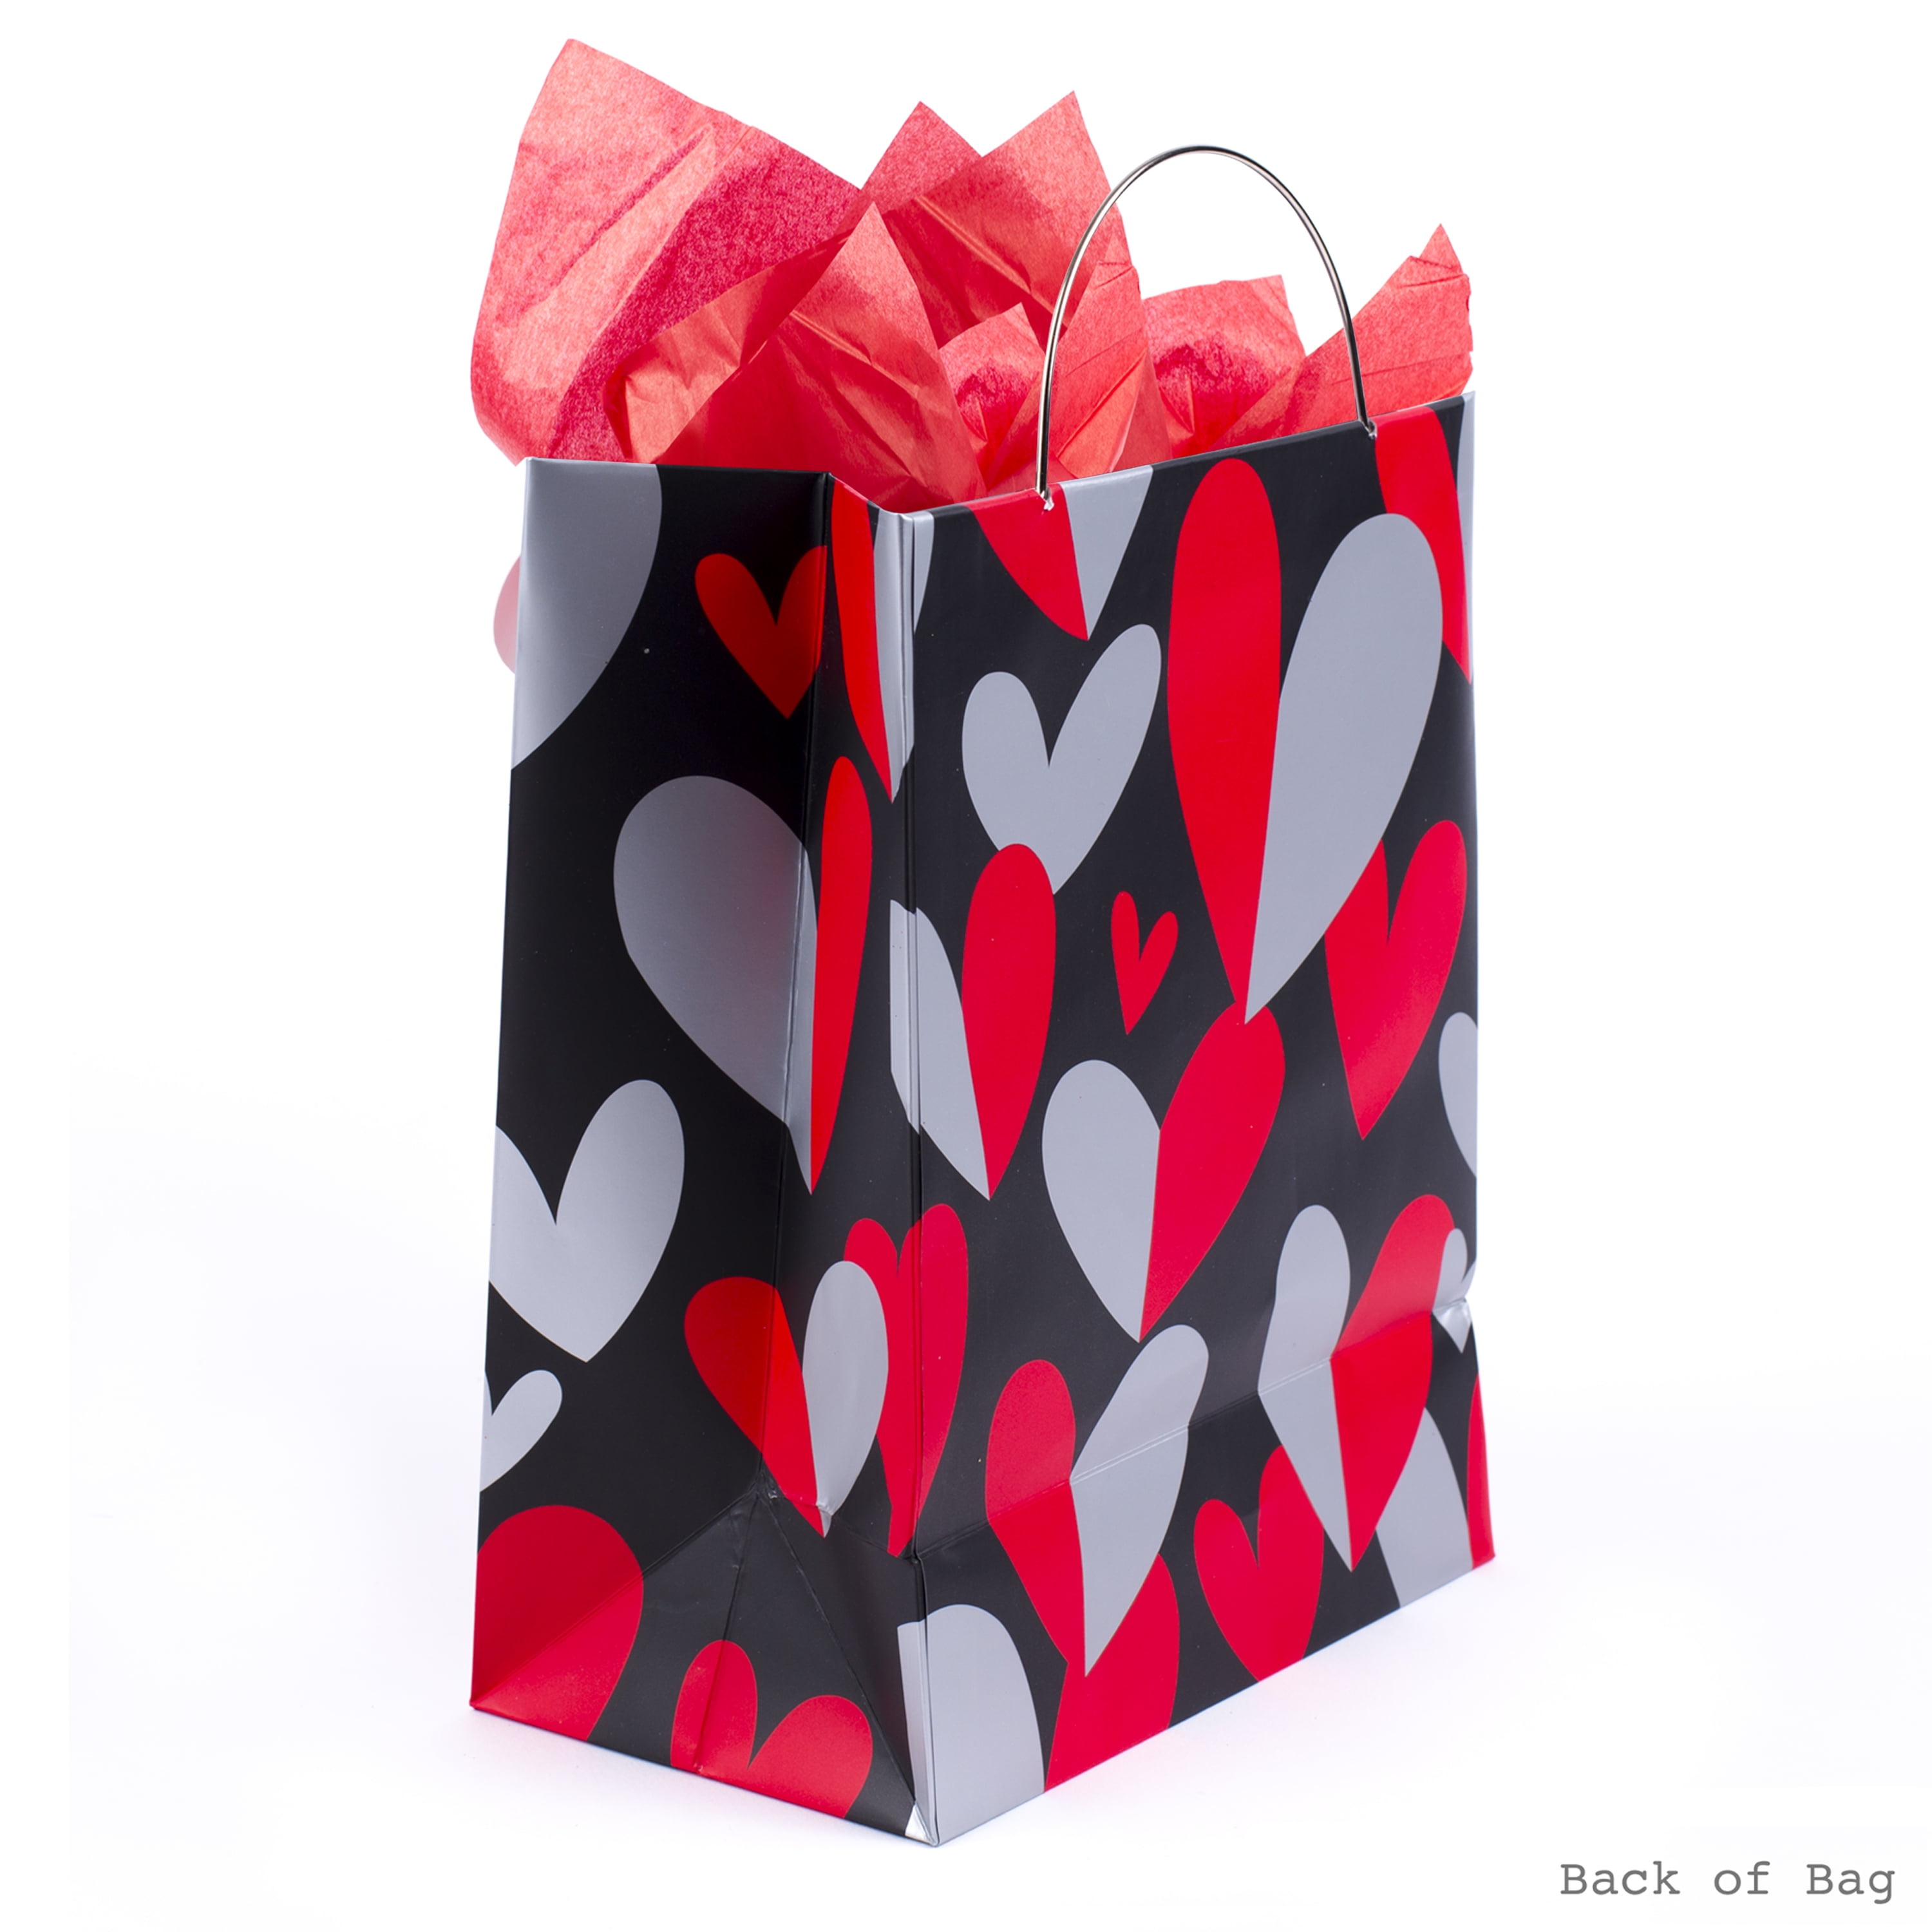 Hallmark 8 Medium Valentine's Day Gift Bags with Tissue Paper 3 Bags: Red with Black, Pink, White Stripes and Hearts 